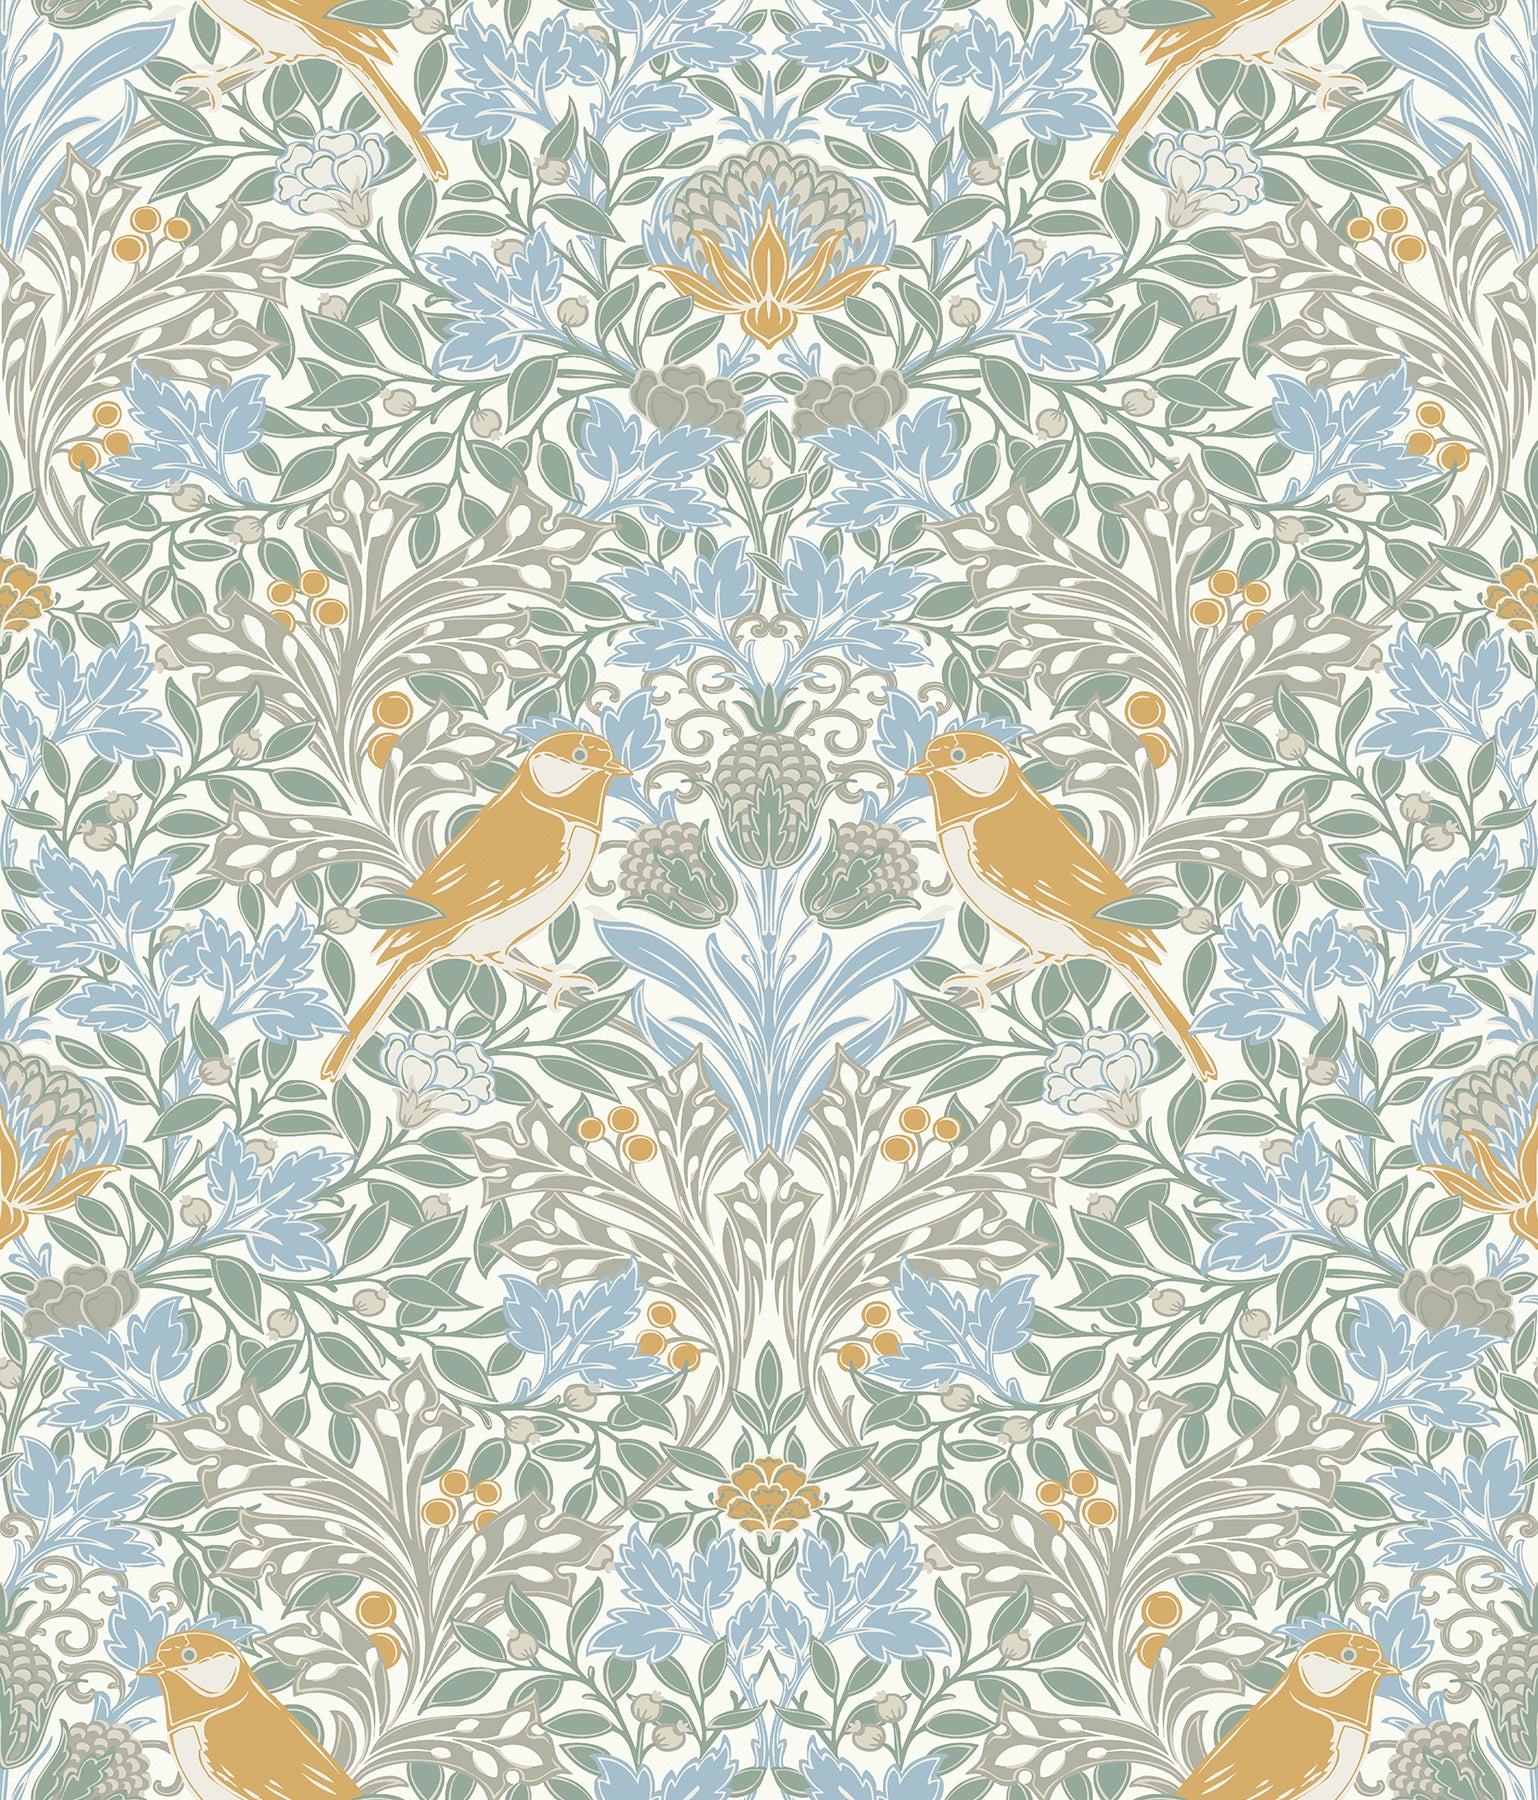 Garden Aviary Peel and Stick Wallpaper Peel and Stick Wallpaper RoomMates Roll Sky Blue 